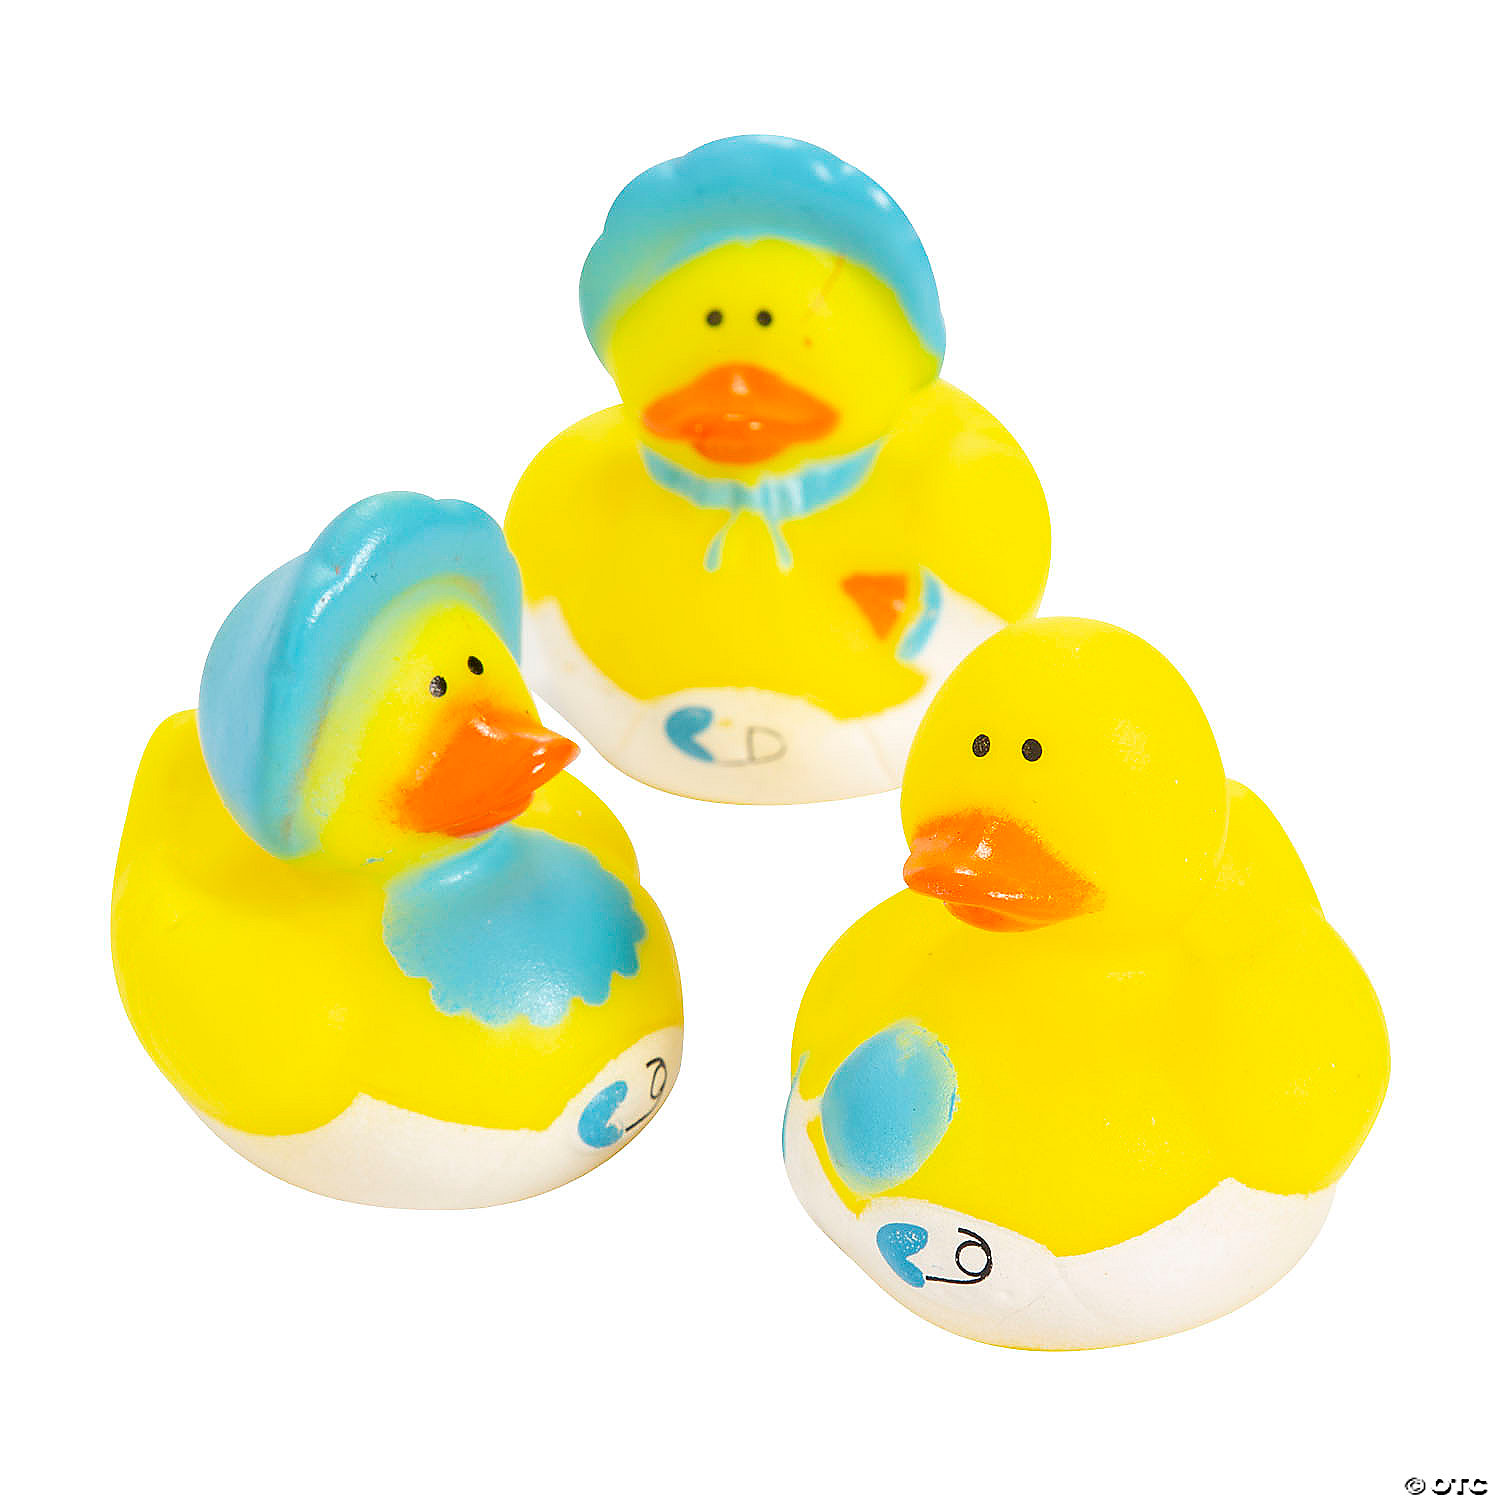 Lot 12 Pack Rubber Ducks Yellow Bath Toy Play Party Kids Cute Baby Shower 1.5 